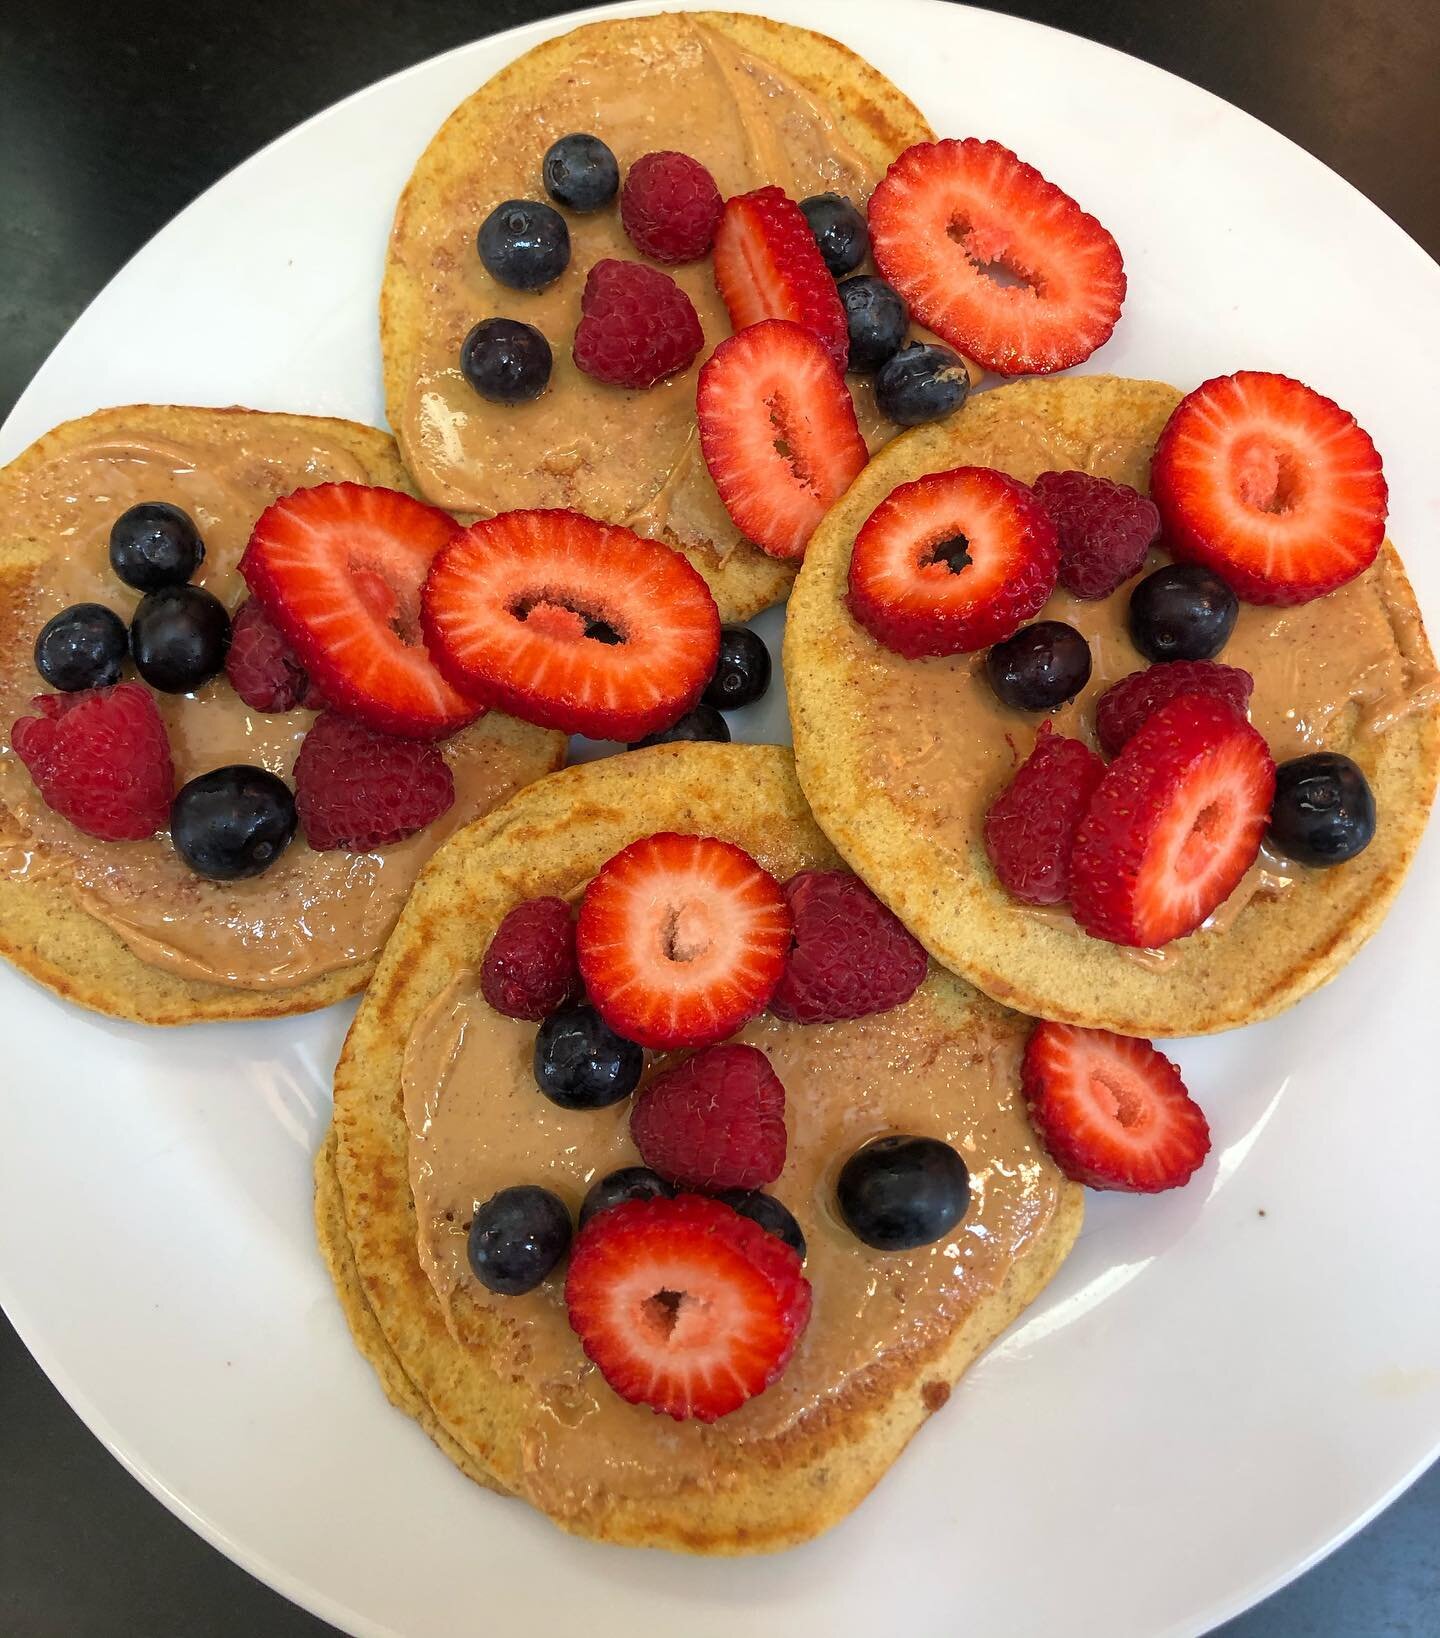 How about a breakfast post?? One of my absolute favorites; protein pancakes with some peanut butter and berries on top. And yes, I ate all four!